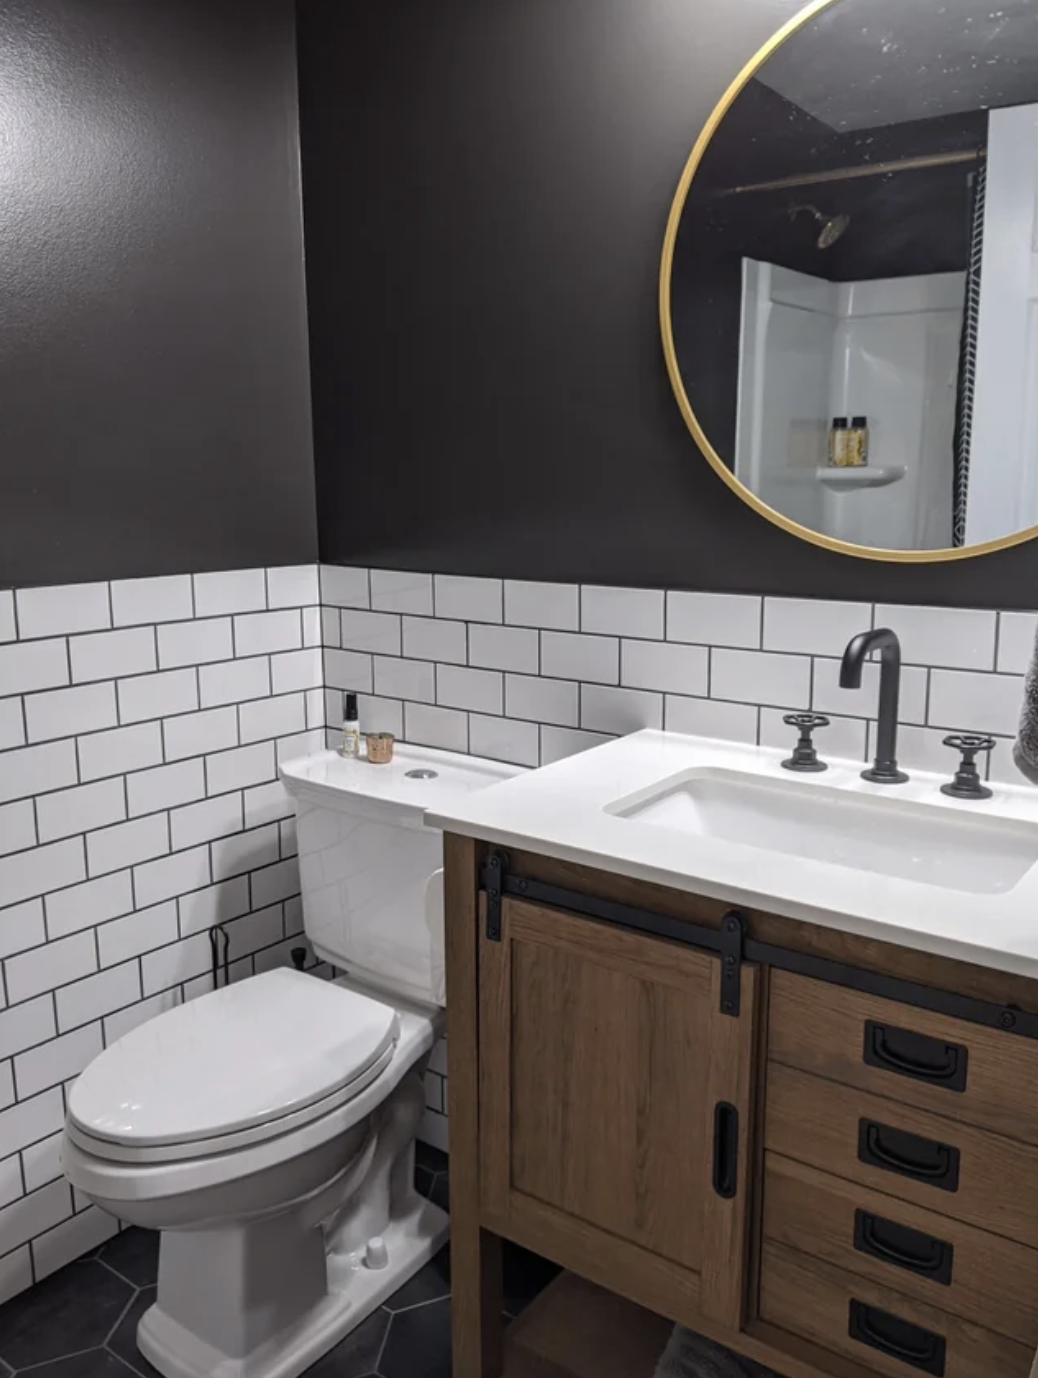 Modern styled bathroom with mirror, sink, and tiled walls